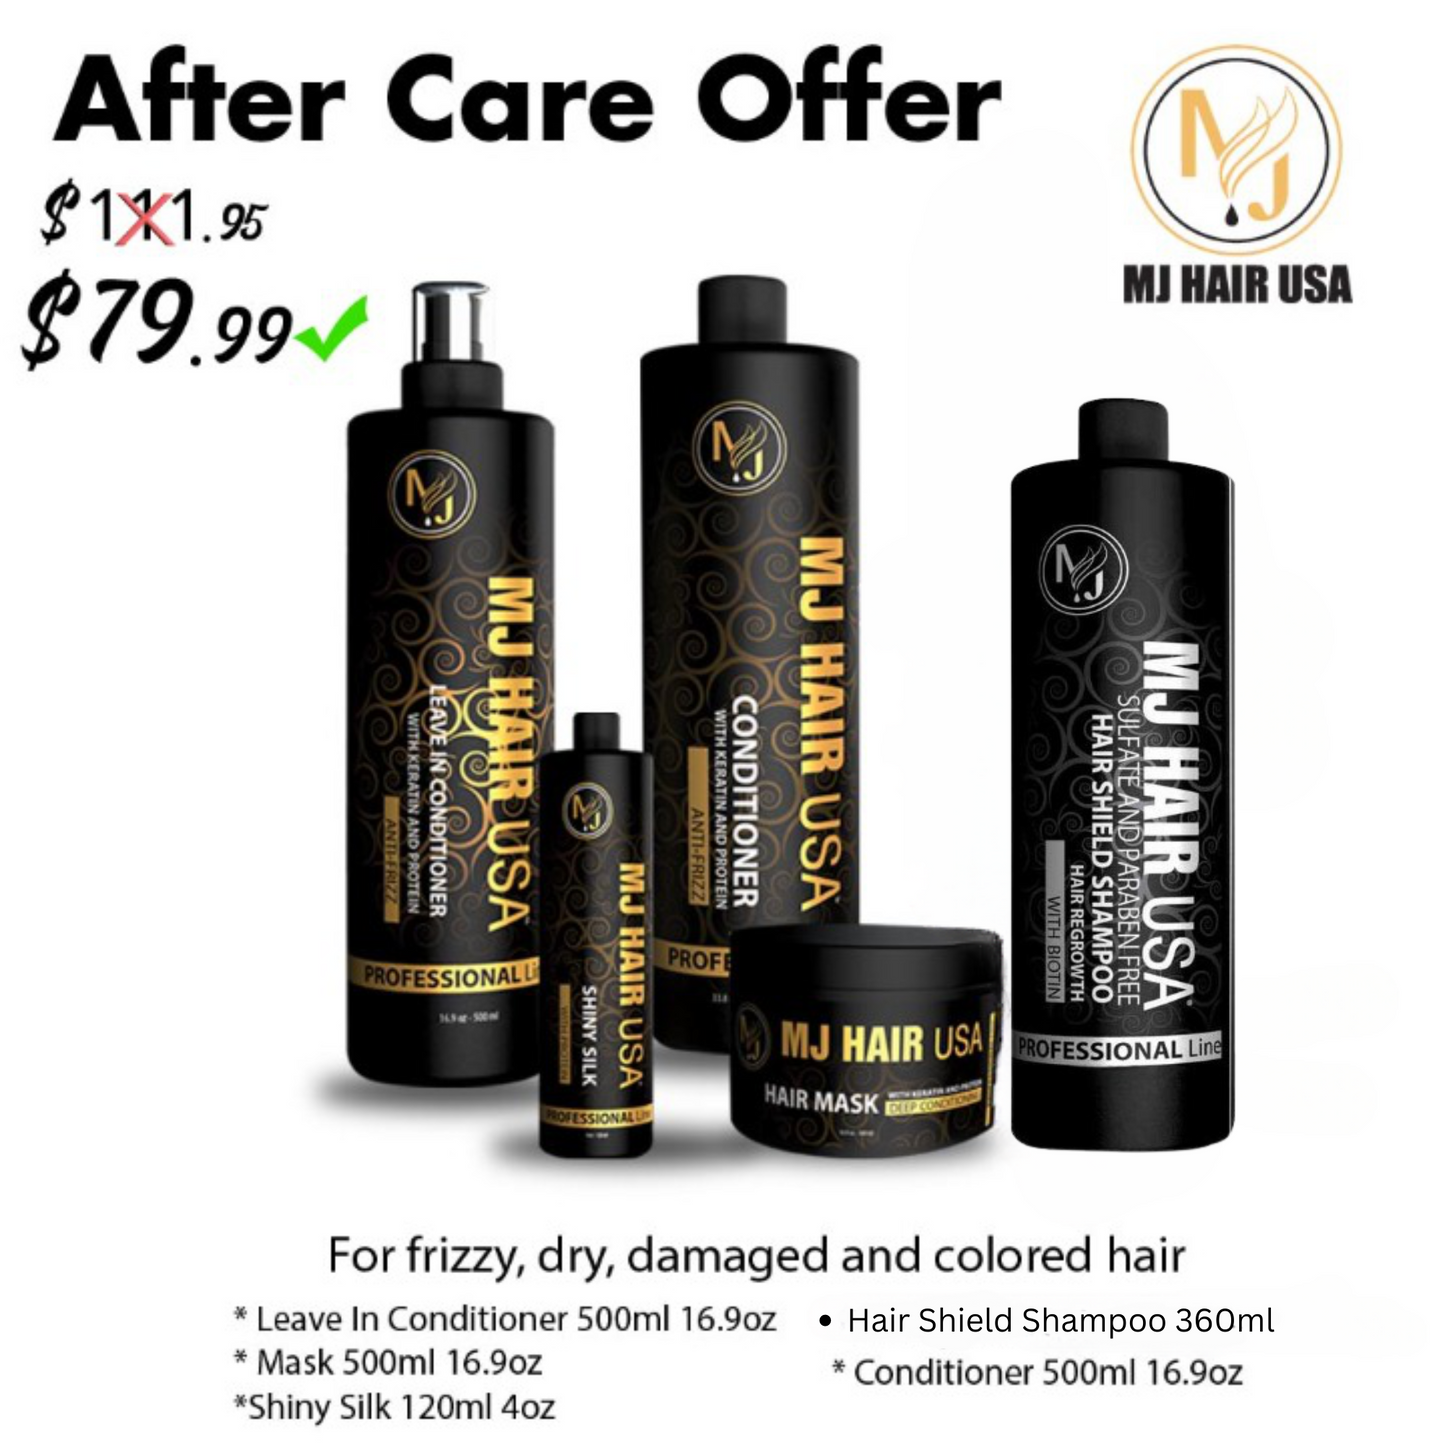 MJ Hair USA | After care Offer | Frizzy Dry Damaged & Colored Hair